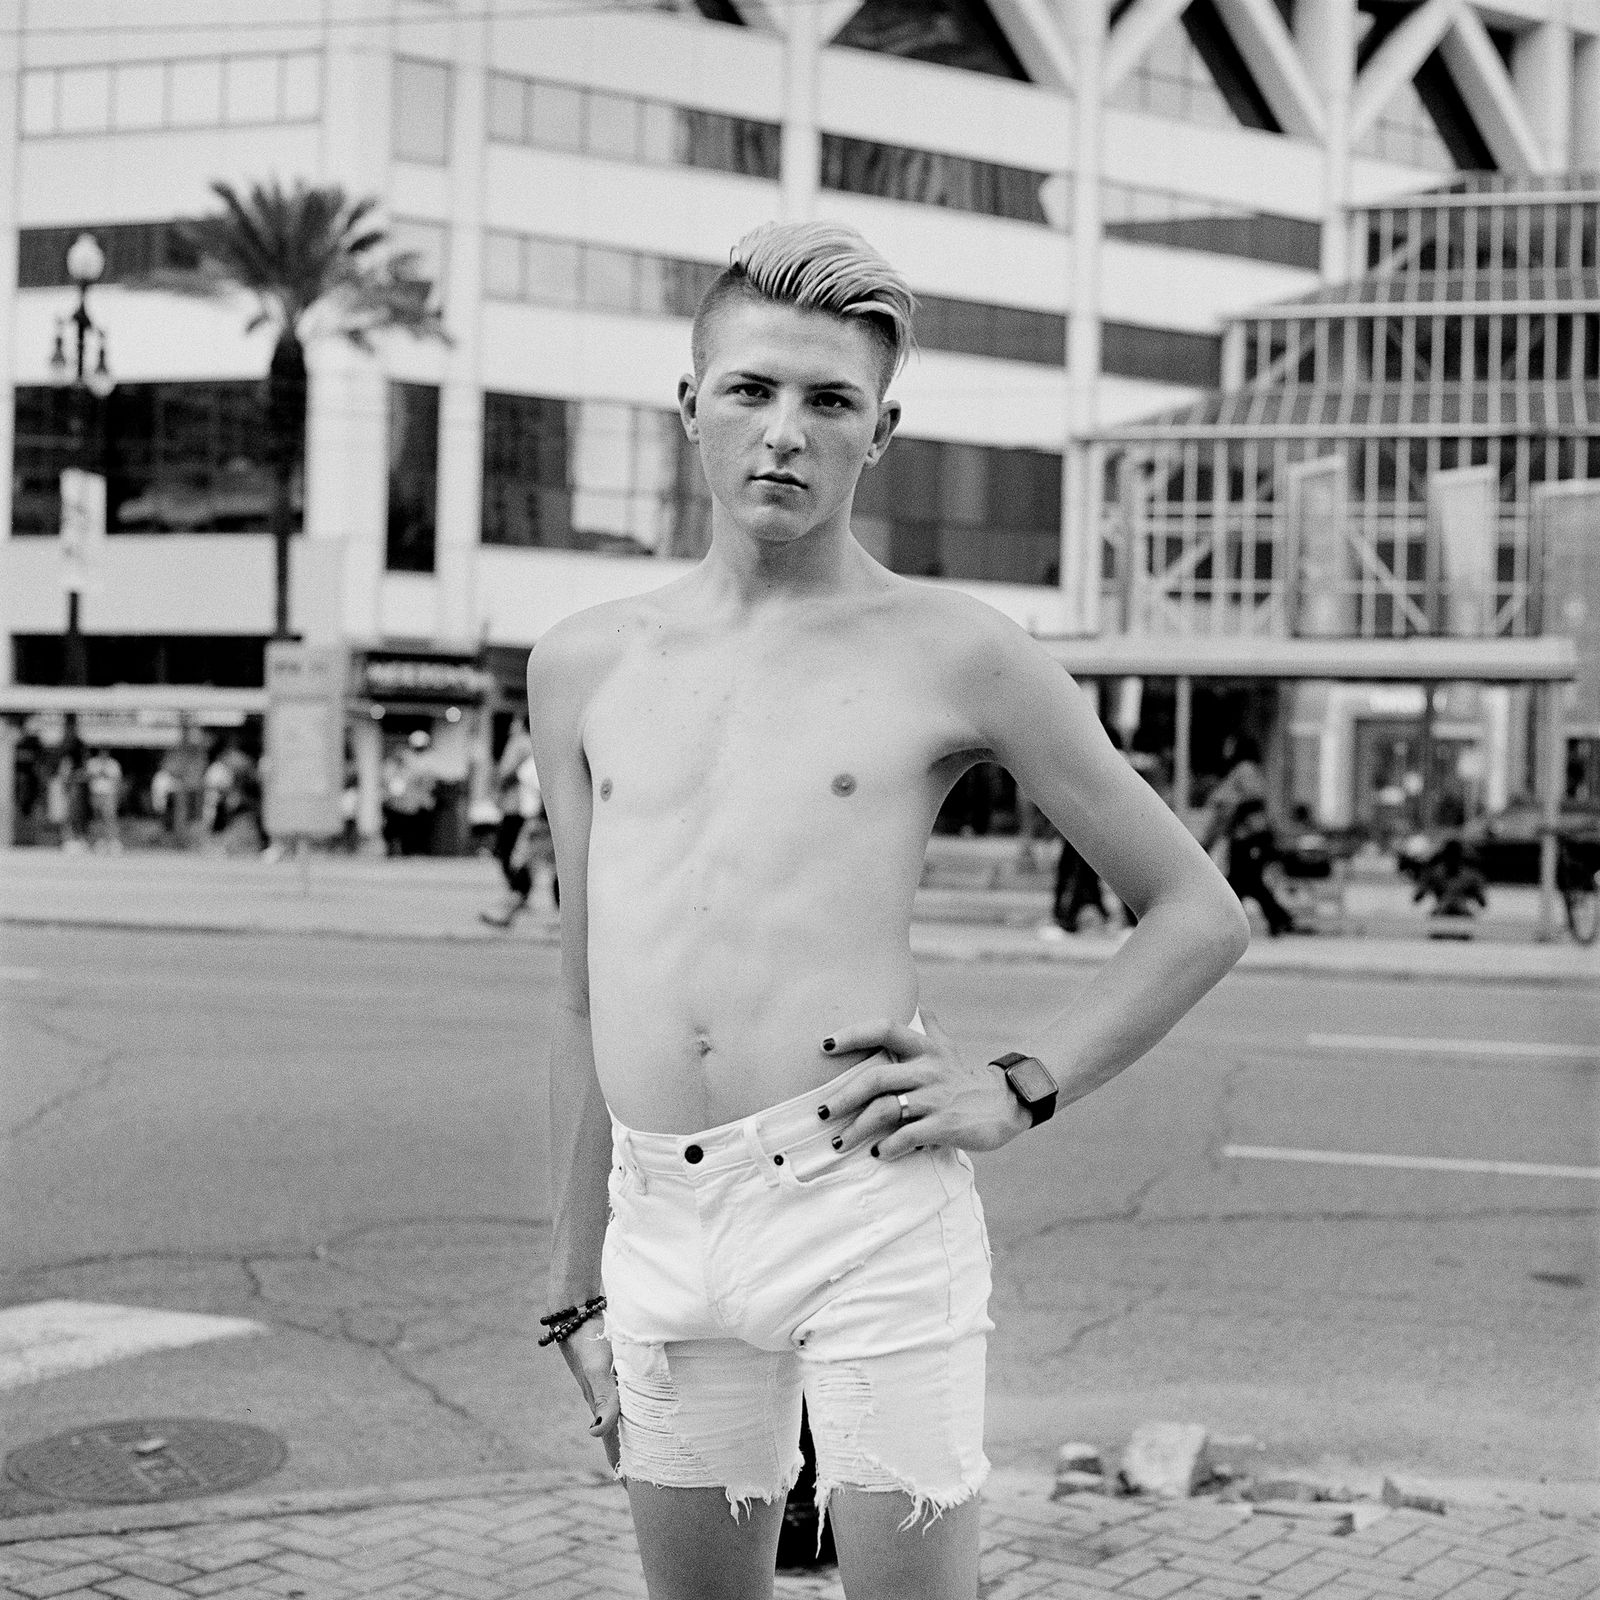 © Jonathan Traviesa - "Michael, Last Night of Southern Decadence" (from LOW HUSTLE HOT CENTER)